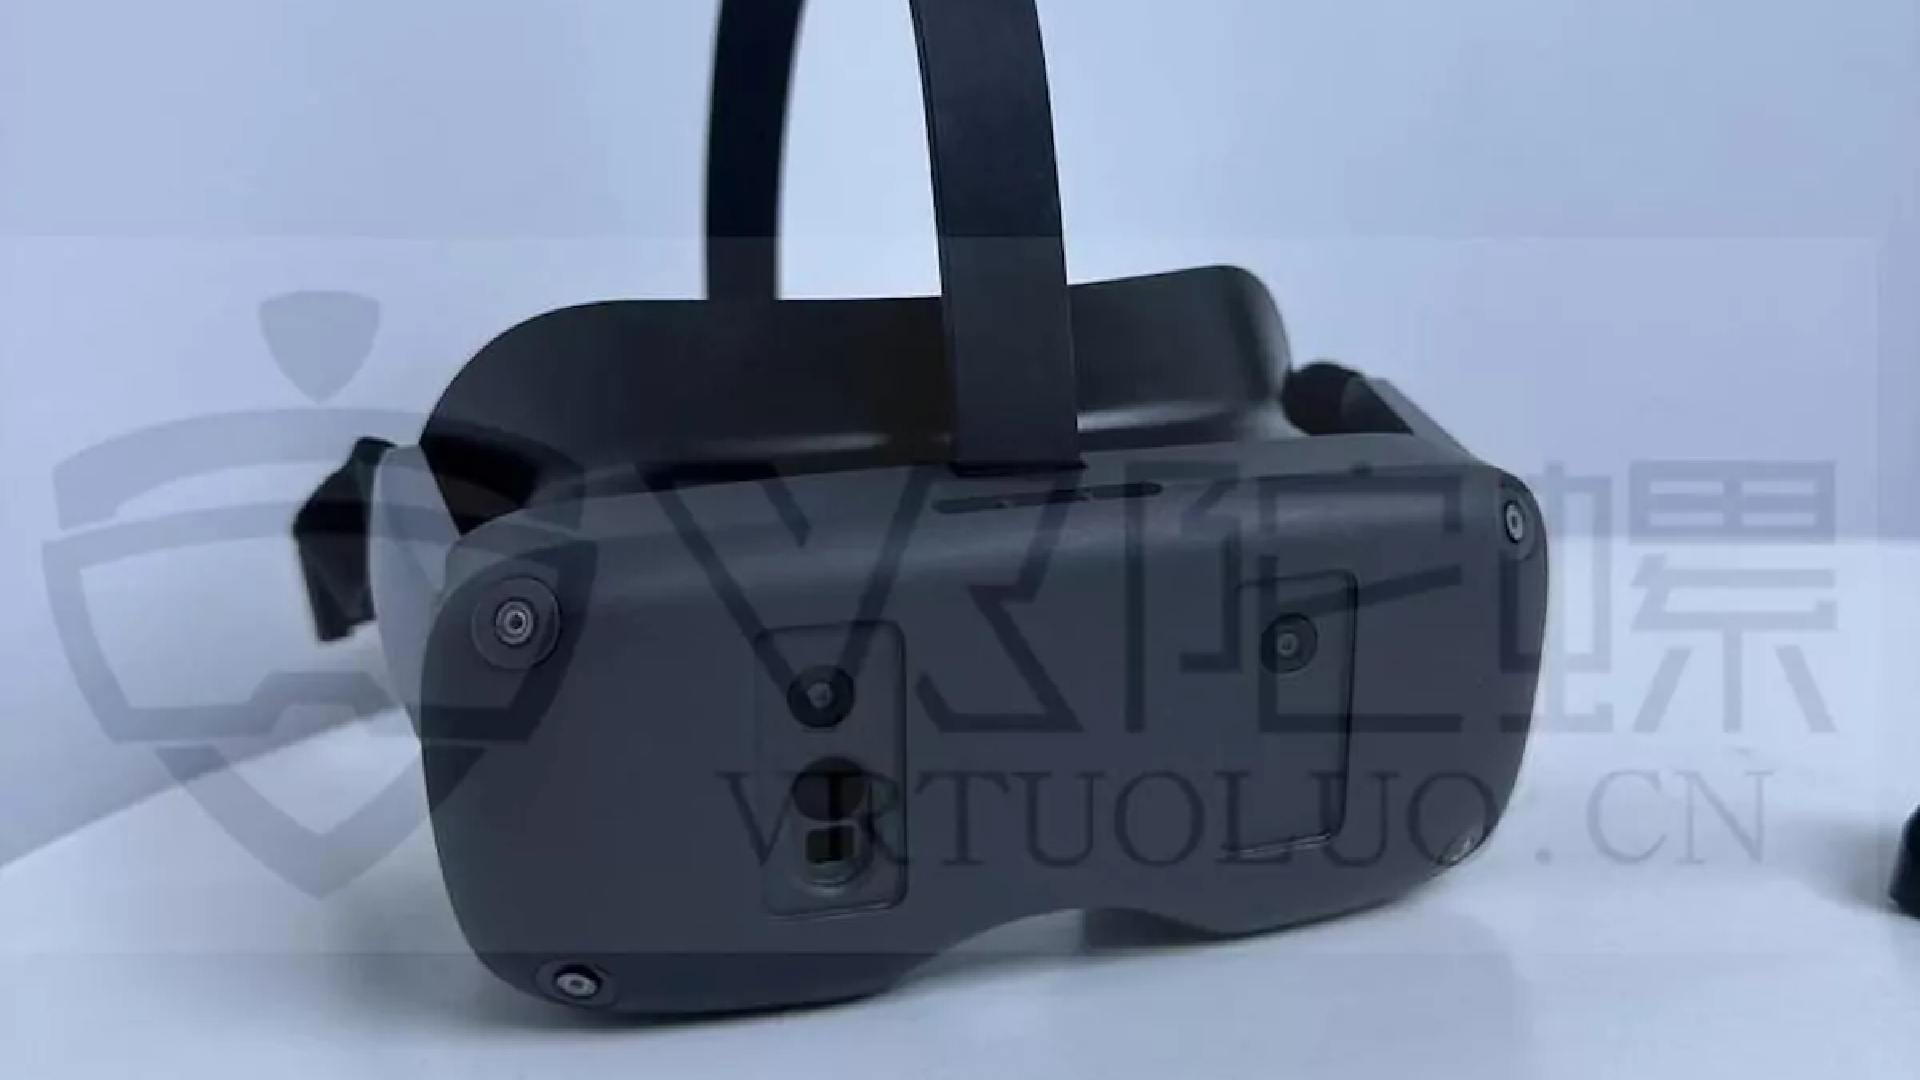 A VR headset cla in black plastic with a simple strap and six visible cameras on its faces